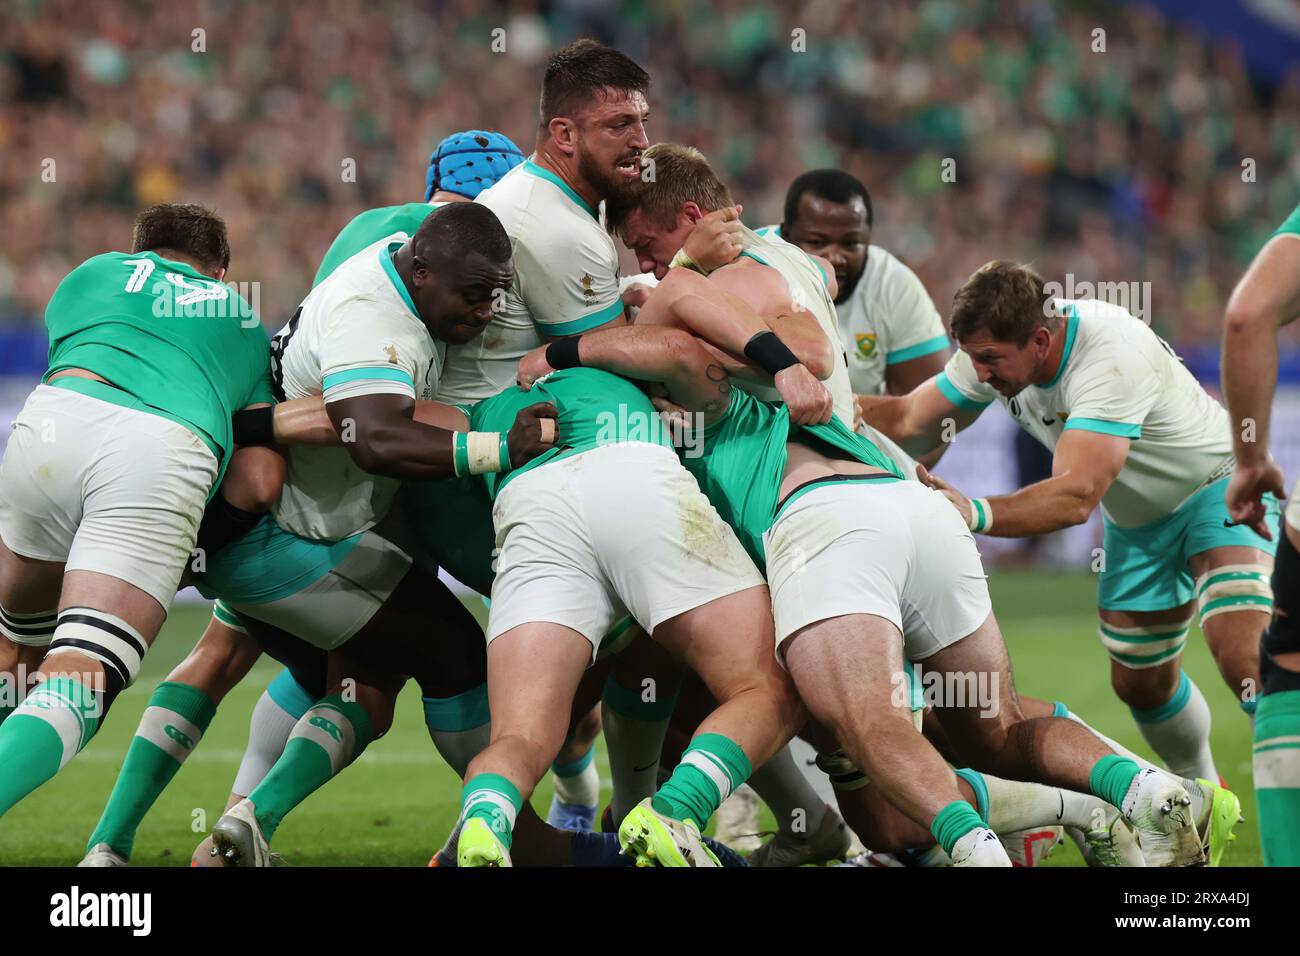 South Africa's Jean Kleyn during the 2023 Rugby World Cup Pool B match between South Africa and Ireland at the Stade de France in Saint-Denis, outside Paris, Saturday, Sept. 23, 2023. Credit: Aki Nagao/AFLO/Alamy Live News Stock Photo